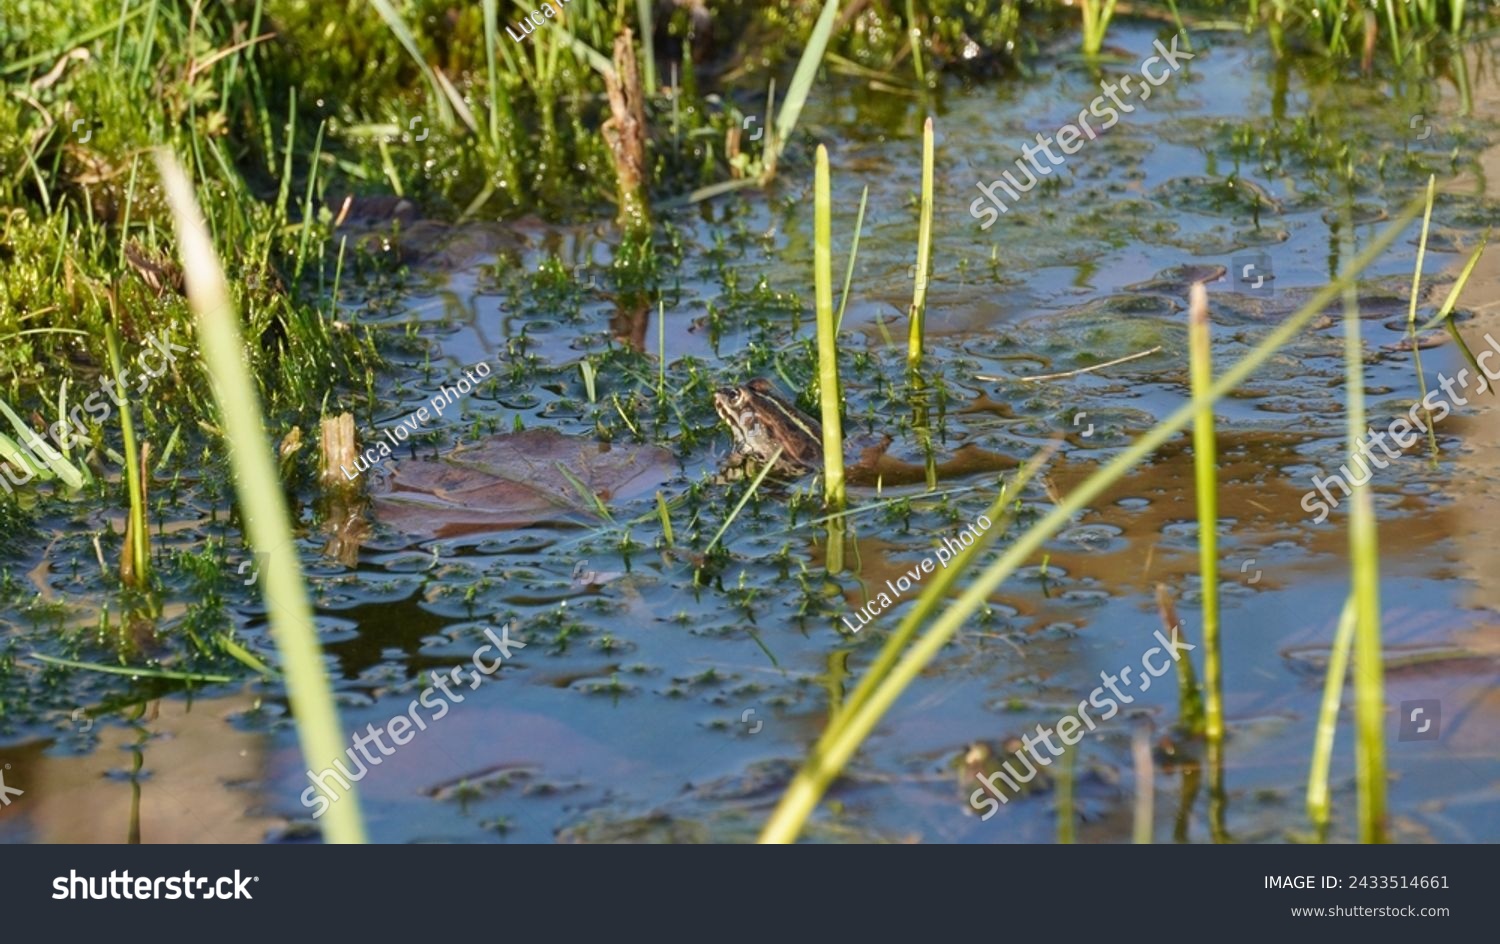 Pelophylax ridibundus, Regulating the temperature in the sun and oxygenating. The Marsh frog, at the pond. Late winter season  #2433514661